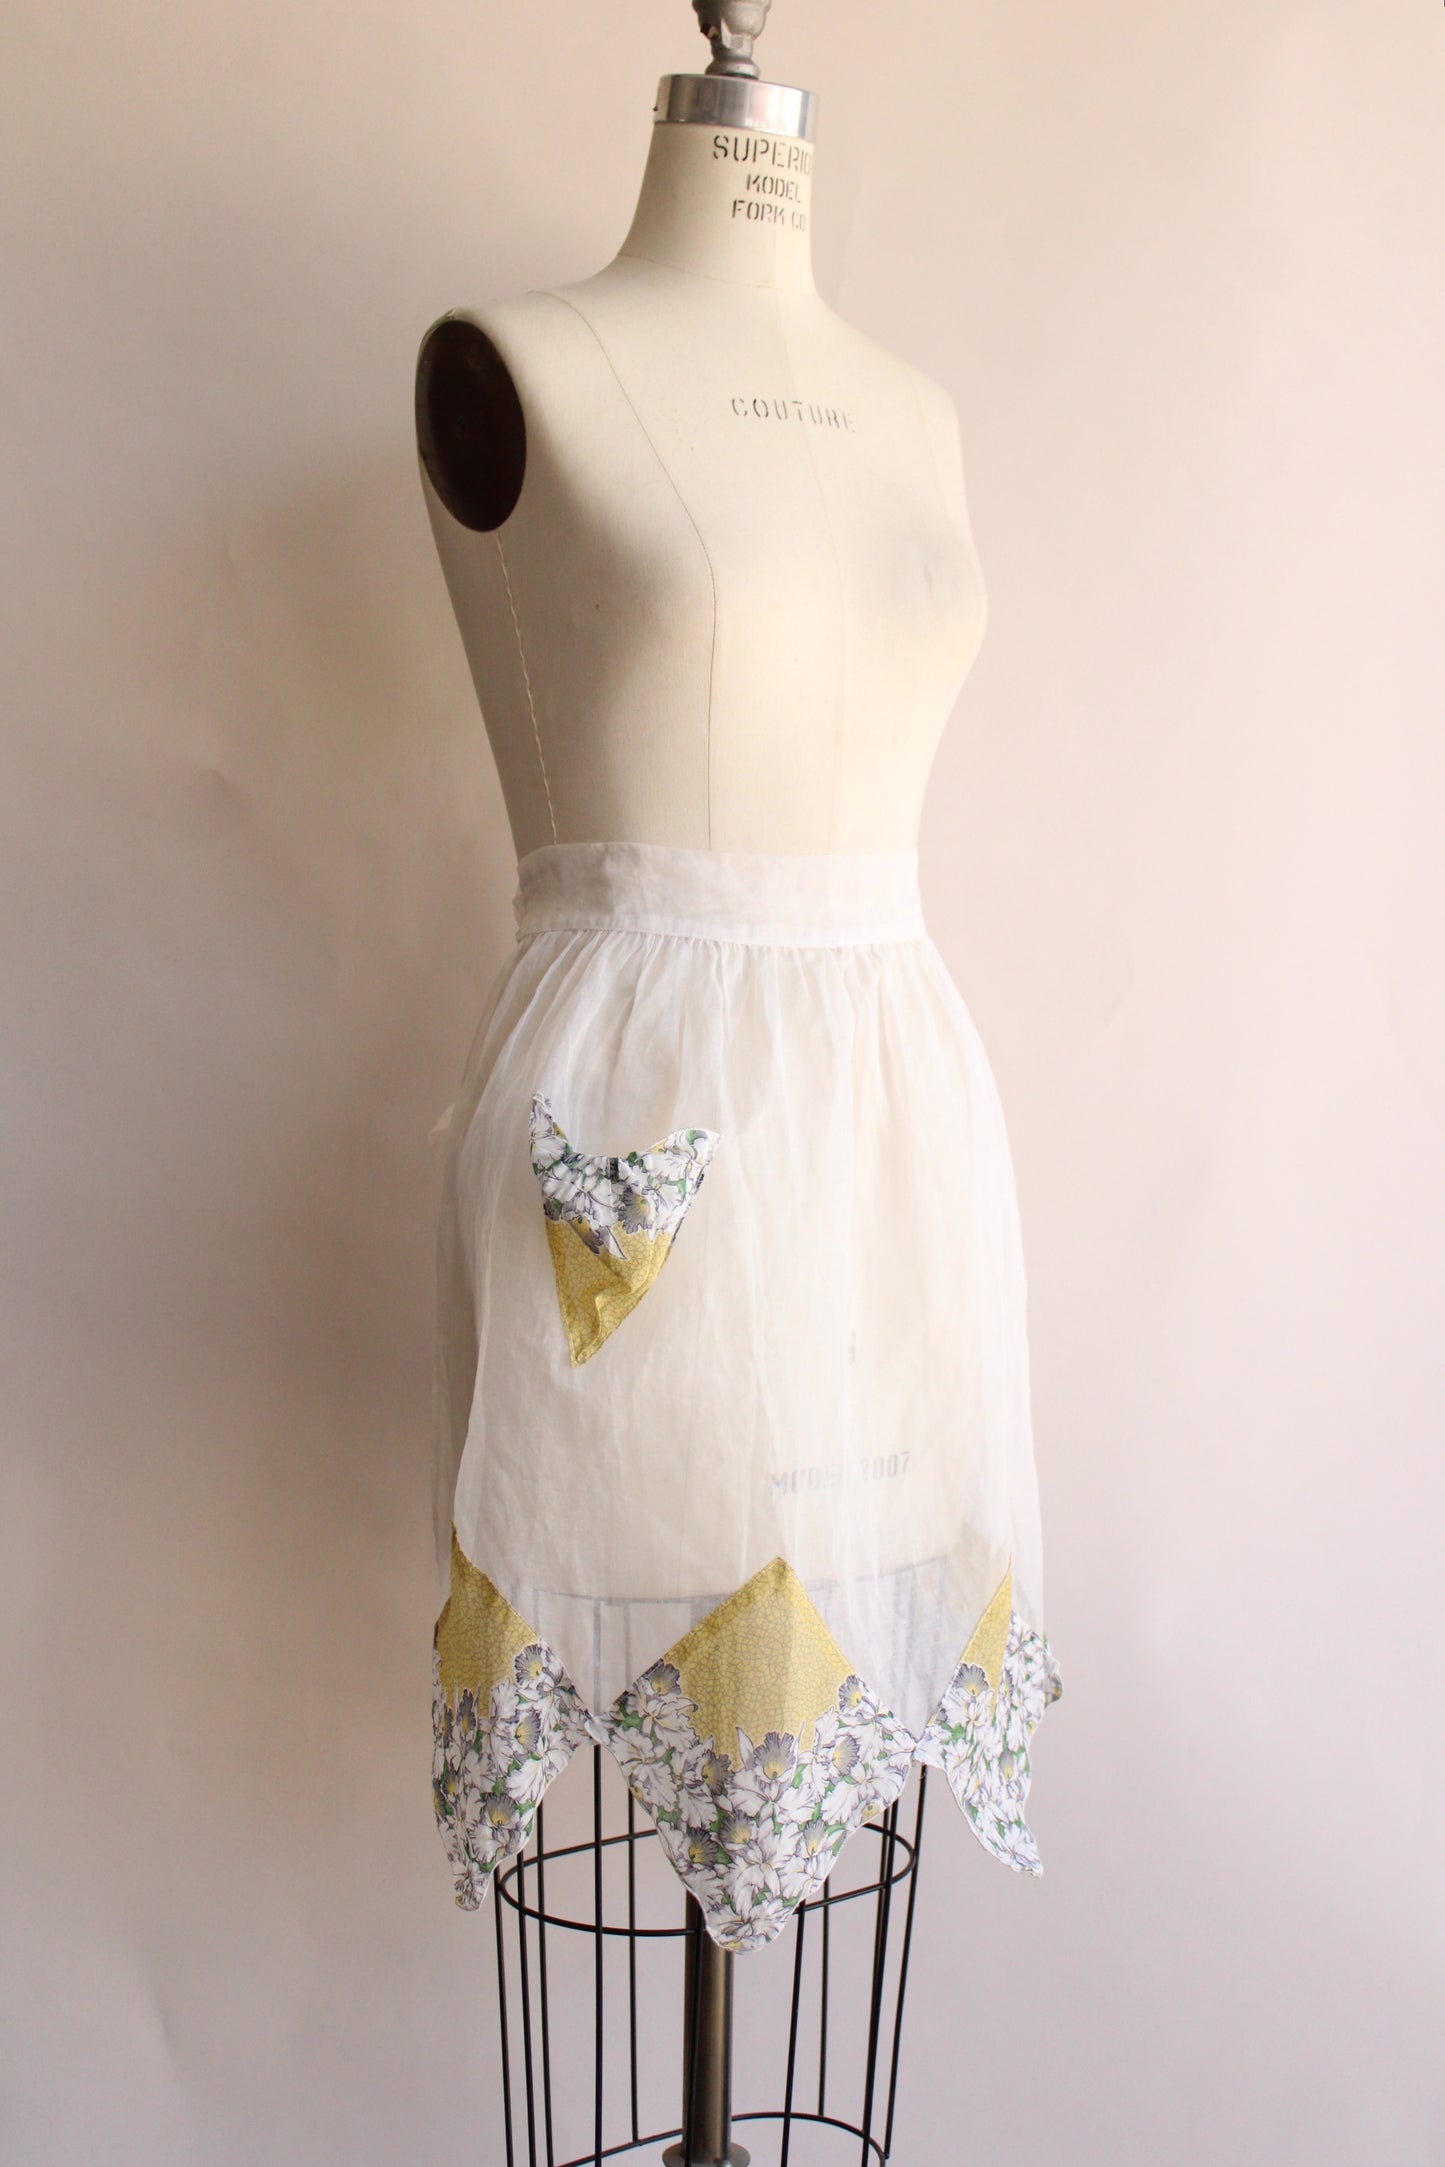 Vintage 1960s Apron with Handkerchief Trim and Pocket